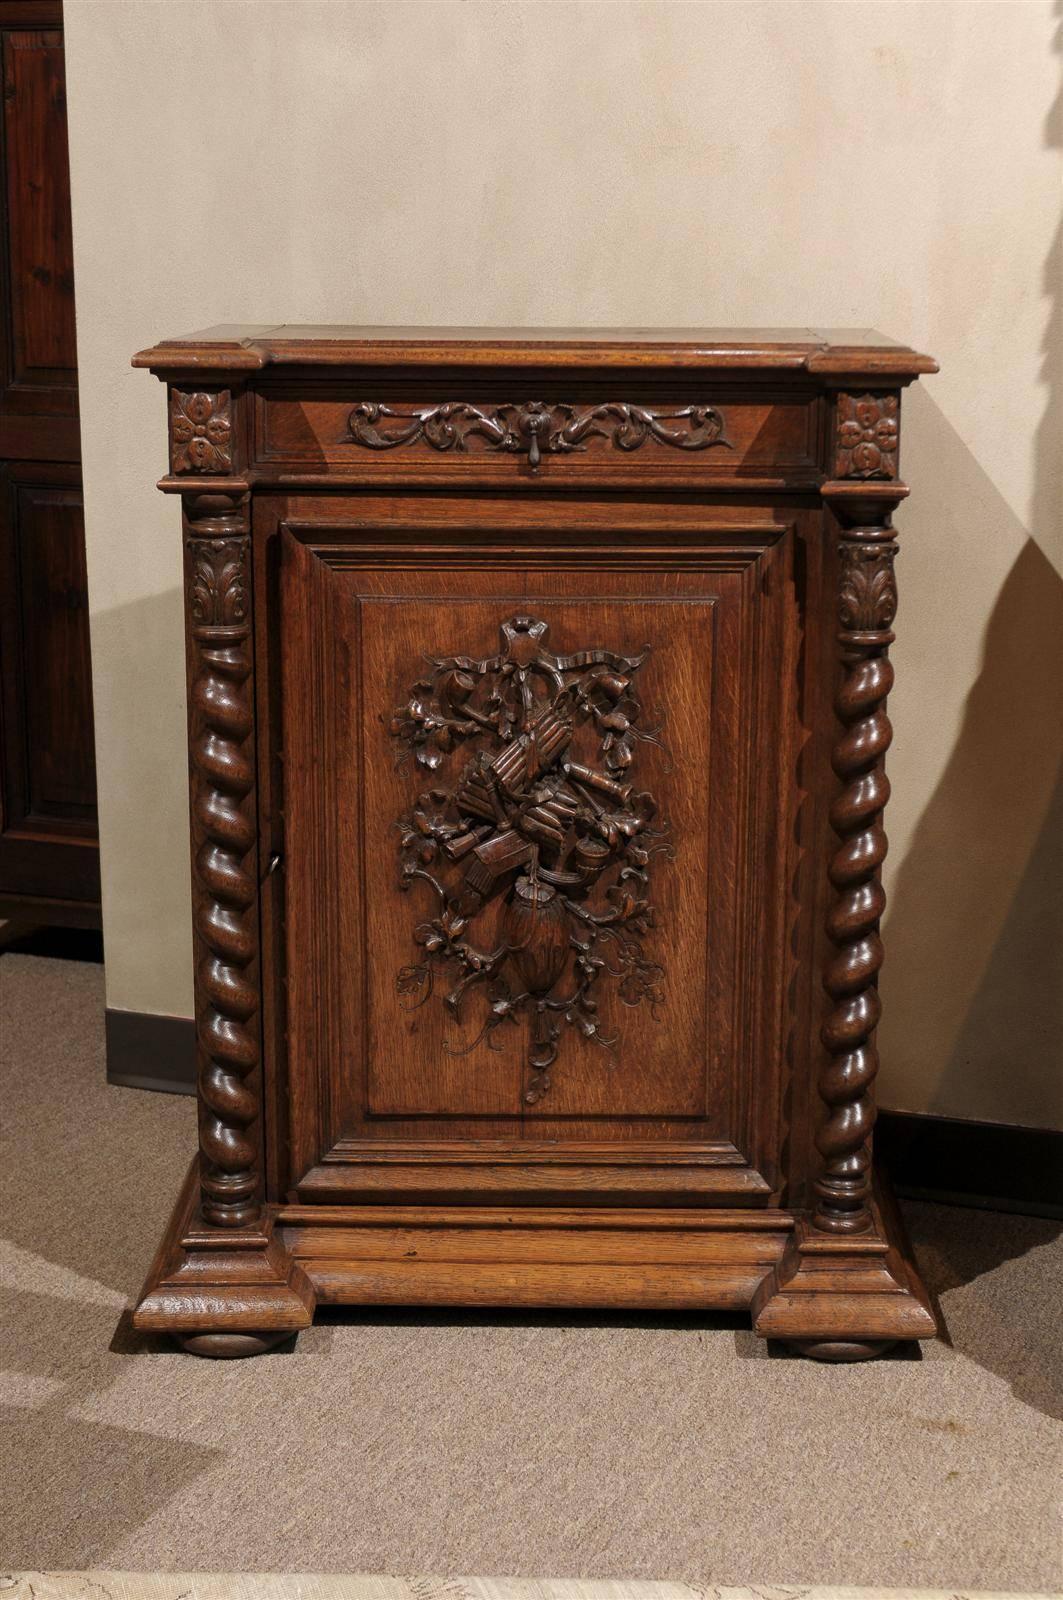 For a small cabinet, this piece has a lot of detail work. We bought it in Normandy, where the heavier styles of furniture originated. Made of oak, our little confiturier also has several shelves and a drawer offering great storage.